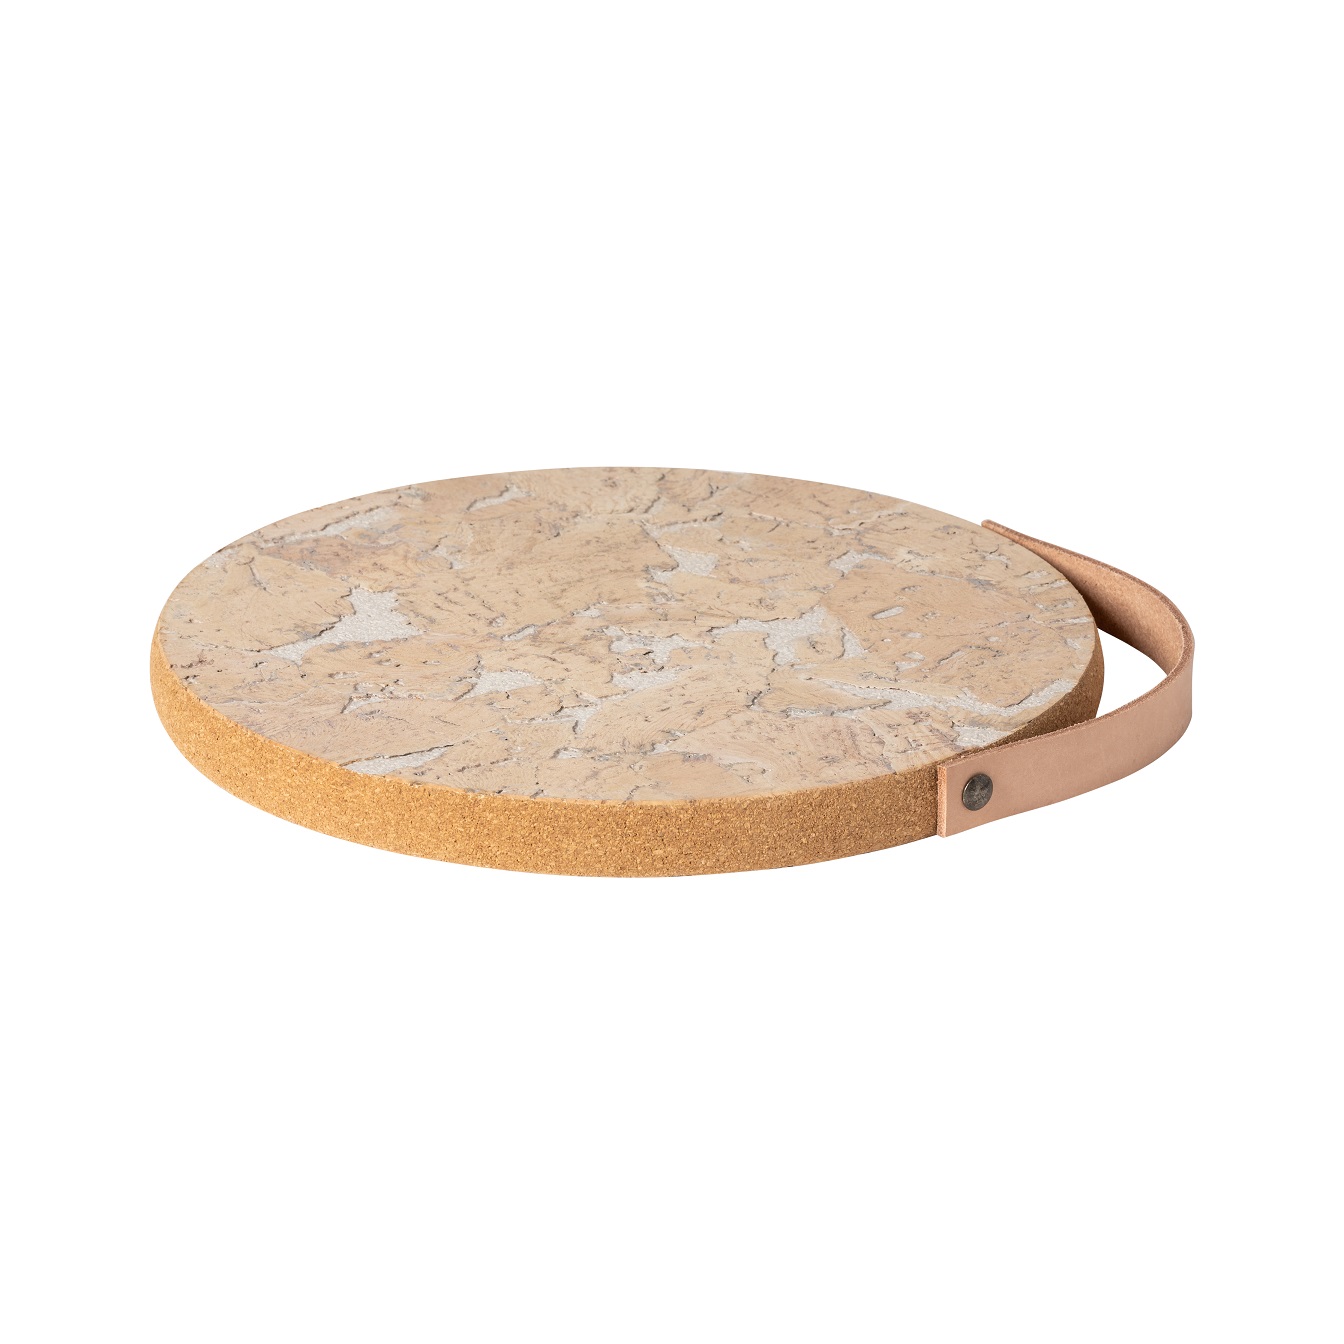 Cork Trivet White Natural 25cm W/ Leather Handle Gift